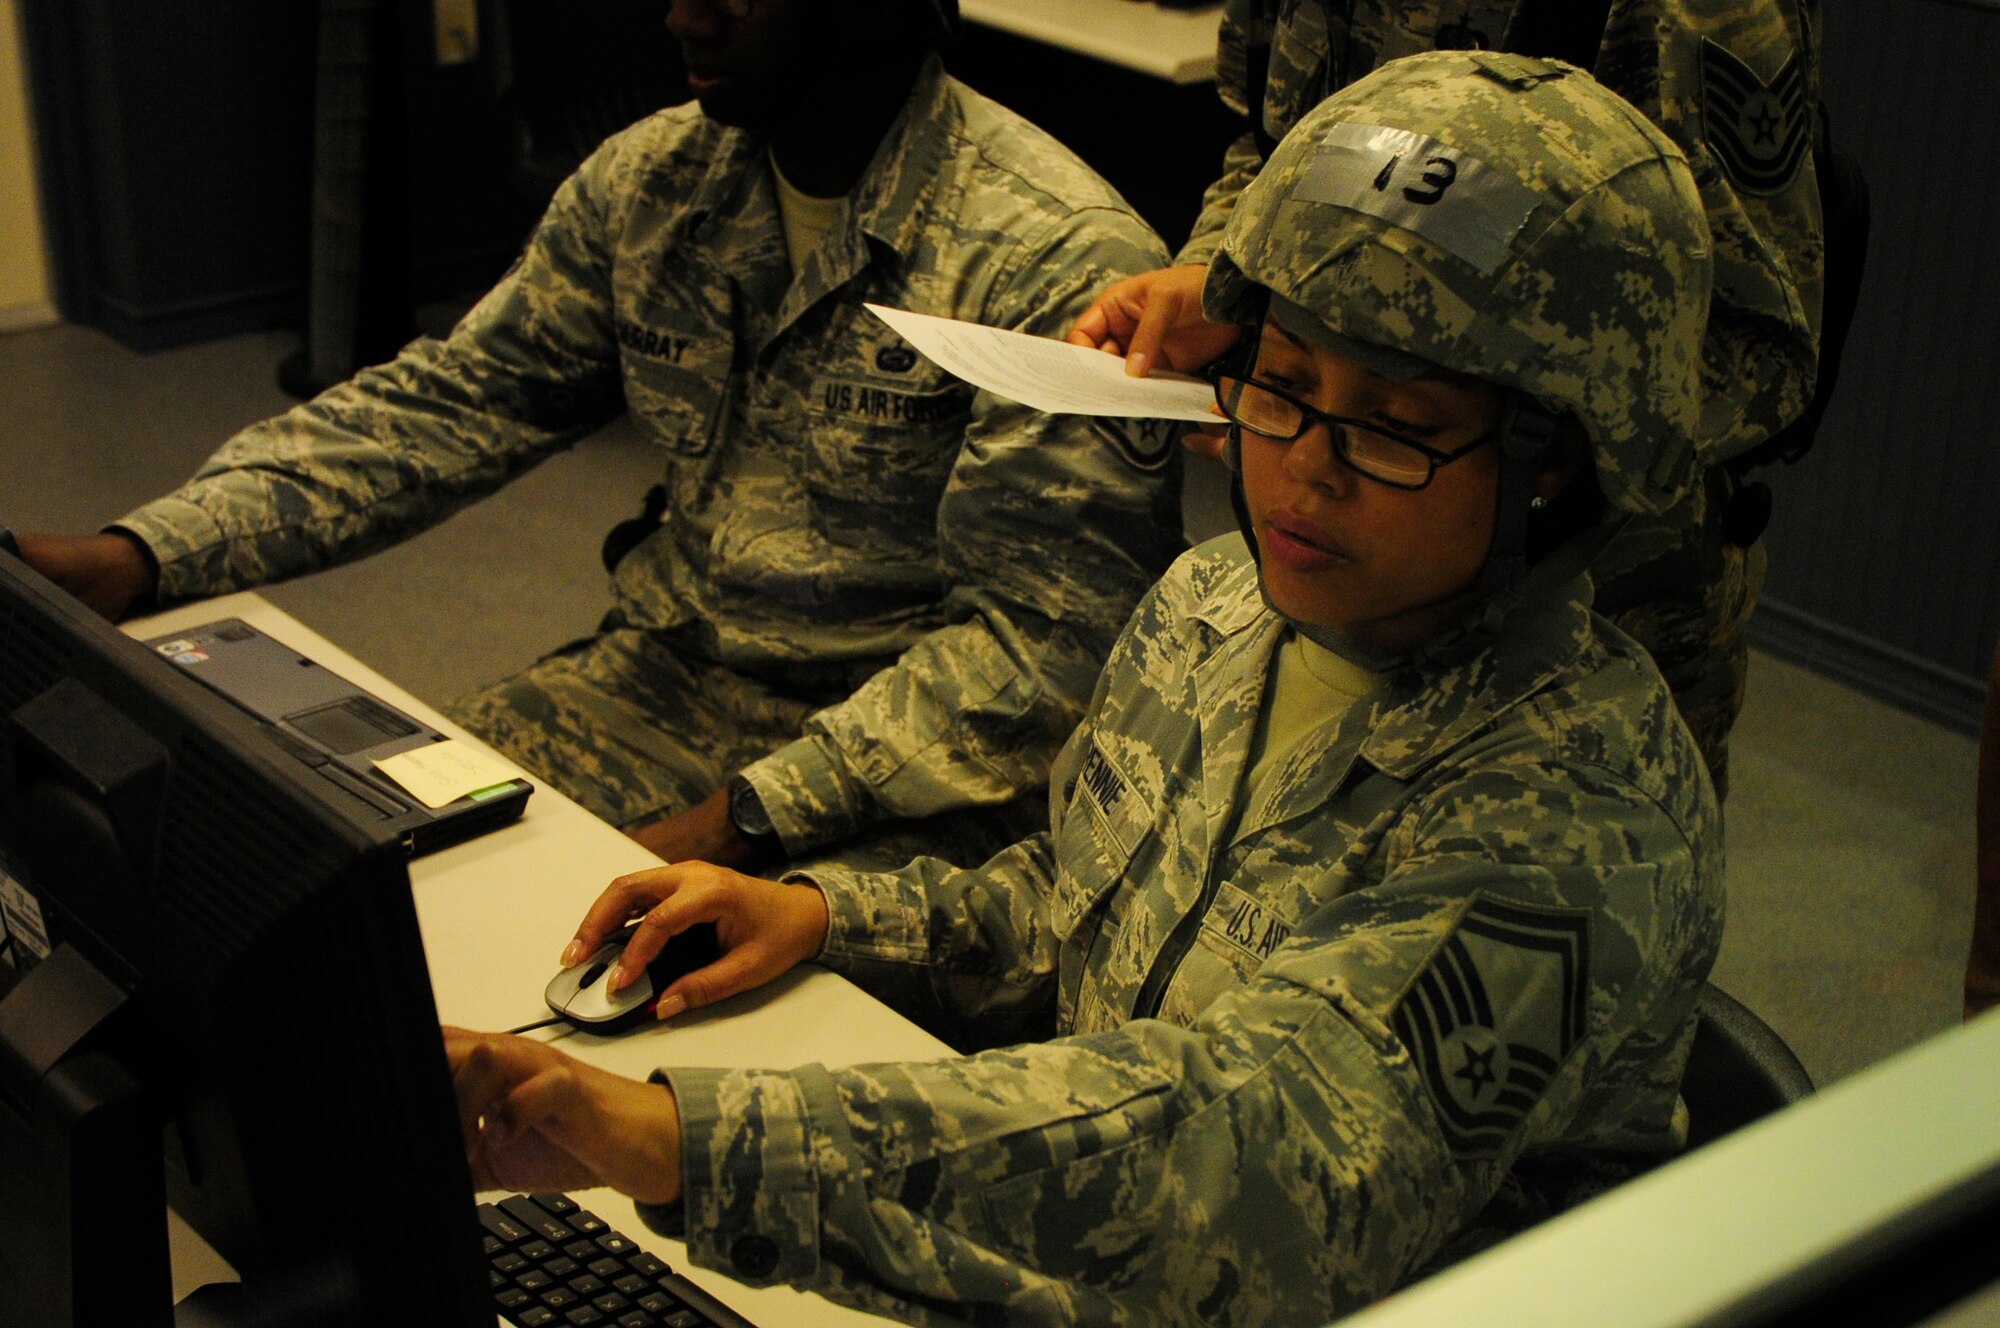 Senior Master Sgt. Angelic Rennie, 823rd REDHORSE Squadron Detachment 1 manpower student, checks and maintains the proper manpower via a computer station Oct. 22 at the Silver flag site as they establish a Forward Operating Base simulation in Location X.  During the seven day Silver Flag course, civil engineers, communications, force support, and finance personnel learn how to build and maintain bare-base operations at a forward-deployed location. Students hone a variety of combat and survival skills, such as repairing bomb-damaged runways and setting up base facilities; fire fighters receive specific expeditionary training that supply the combatant commander with a highly trained and skilled emergency response force. (U.S. Air Force photo by Senior Airman Solomon Cook/Released)